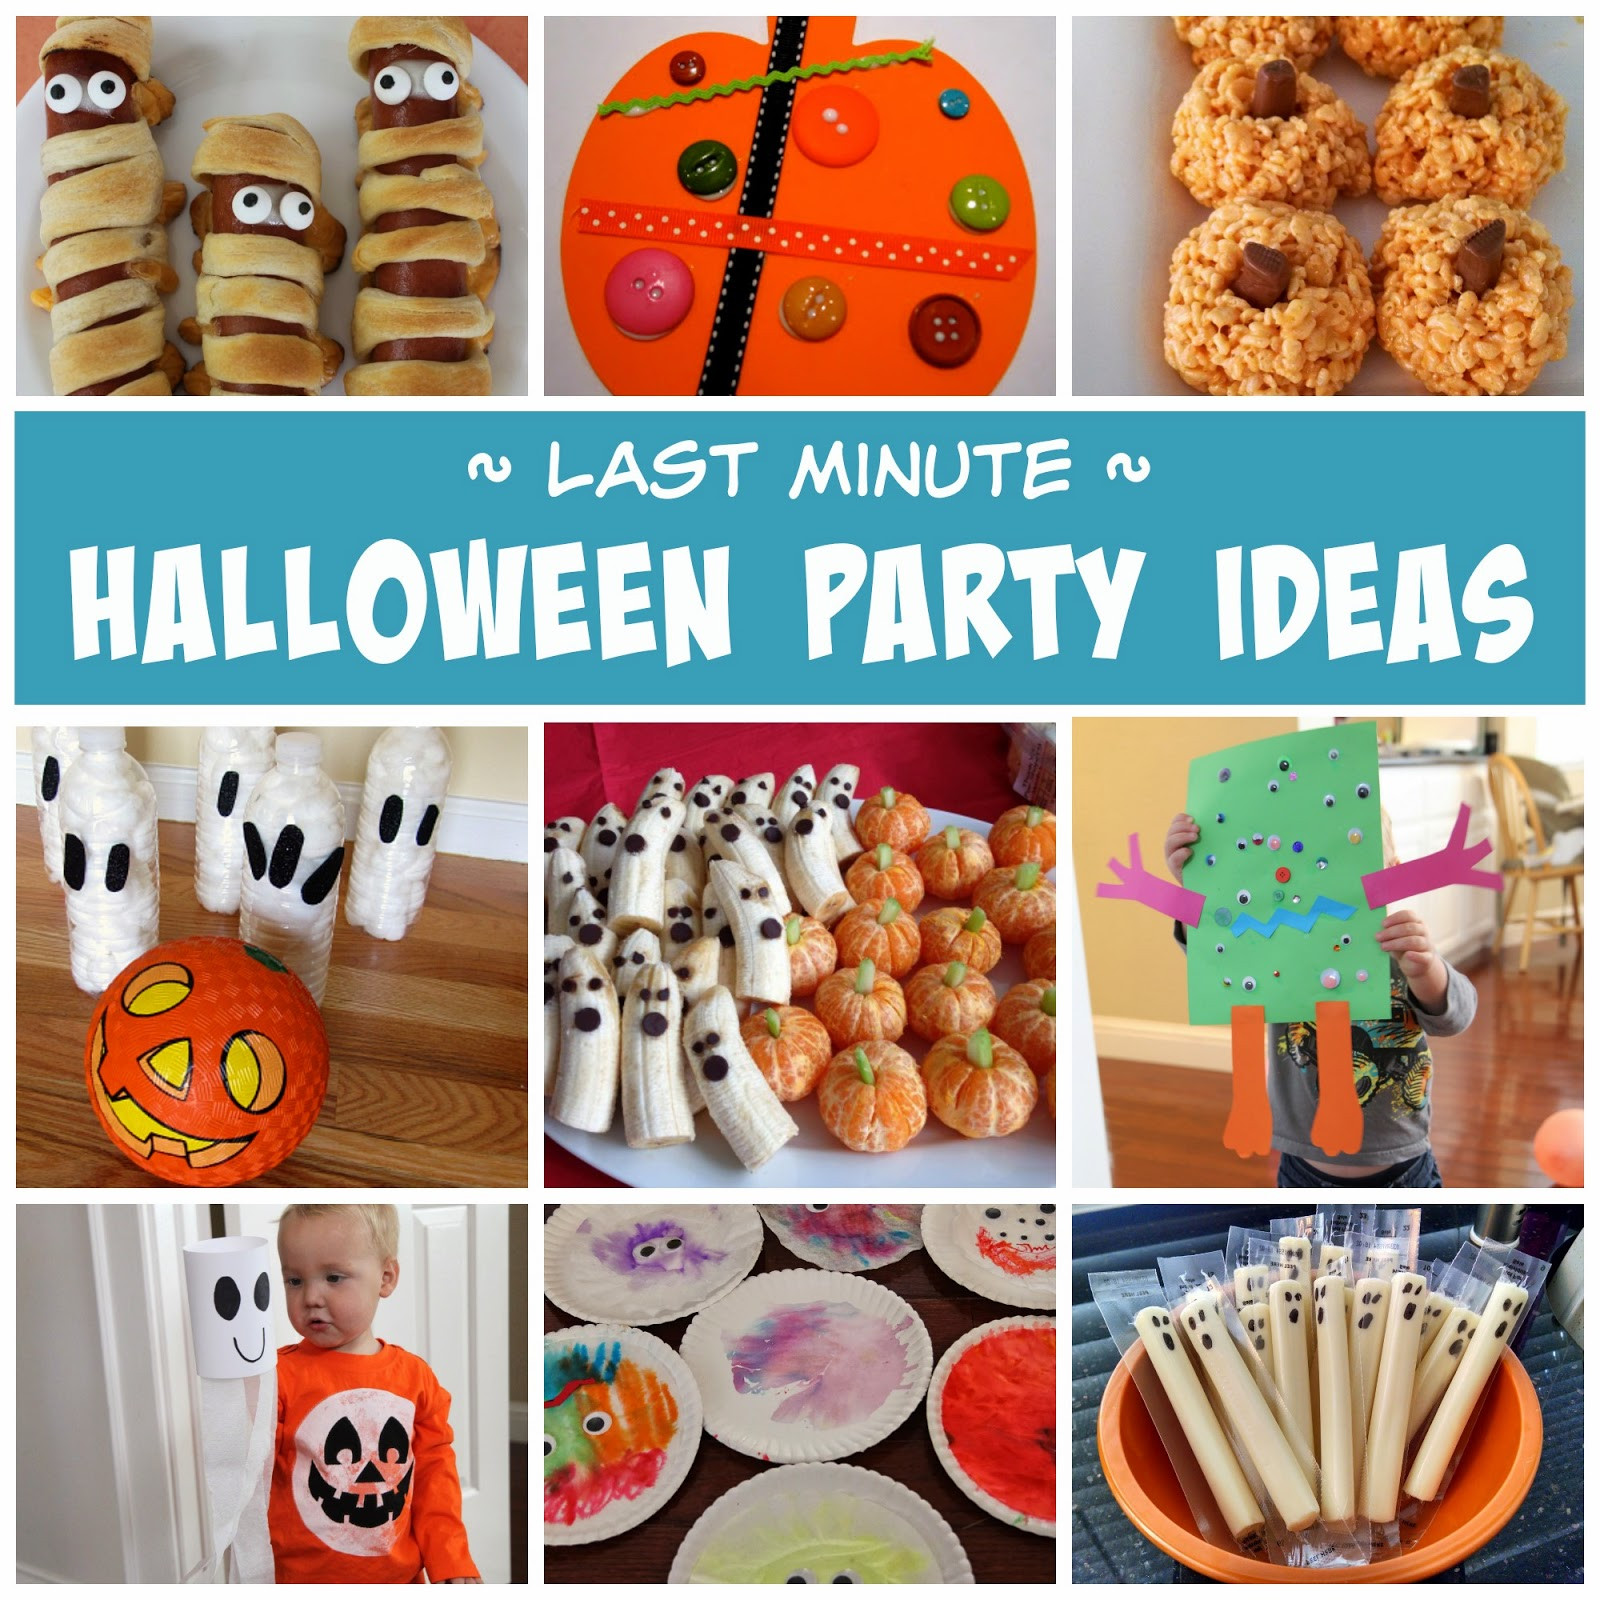 Fun Halloween Party Ideas
 Toddler Approved Last Minute Halloween Party Ideas